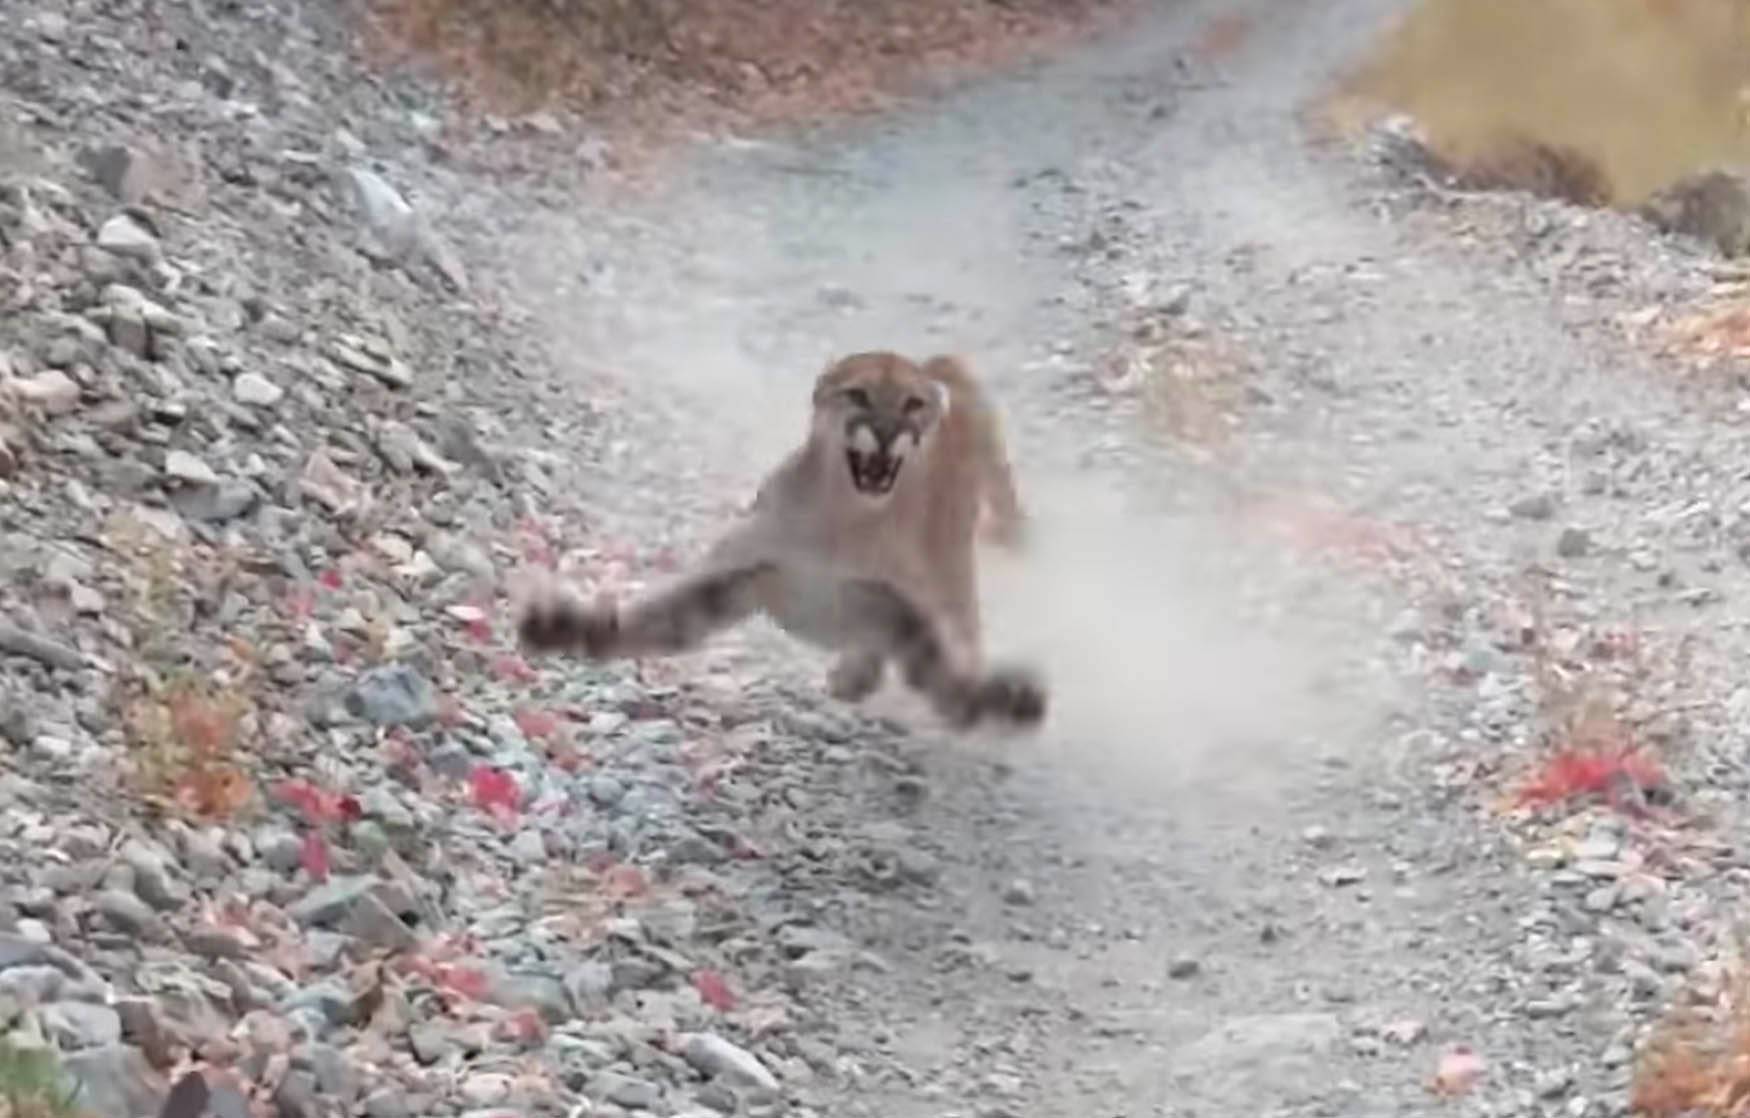 Watch a mountain lion chase a man for a terrifying 6 minutes - BGR

